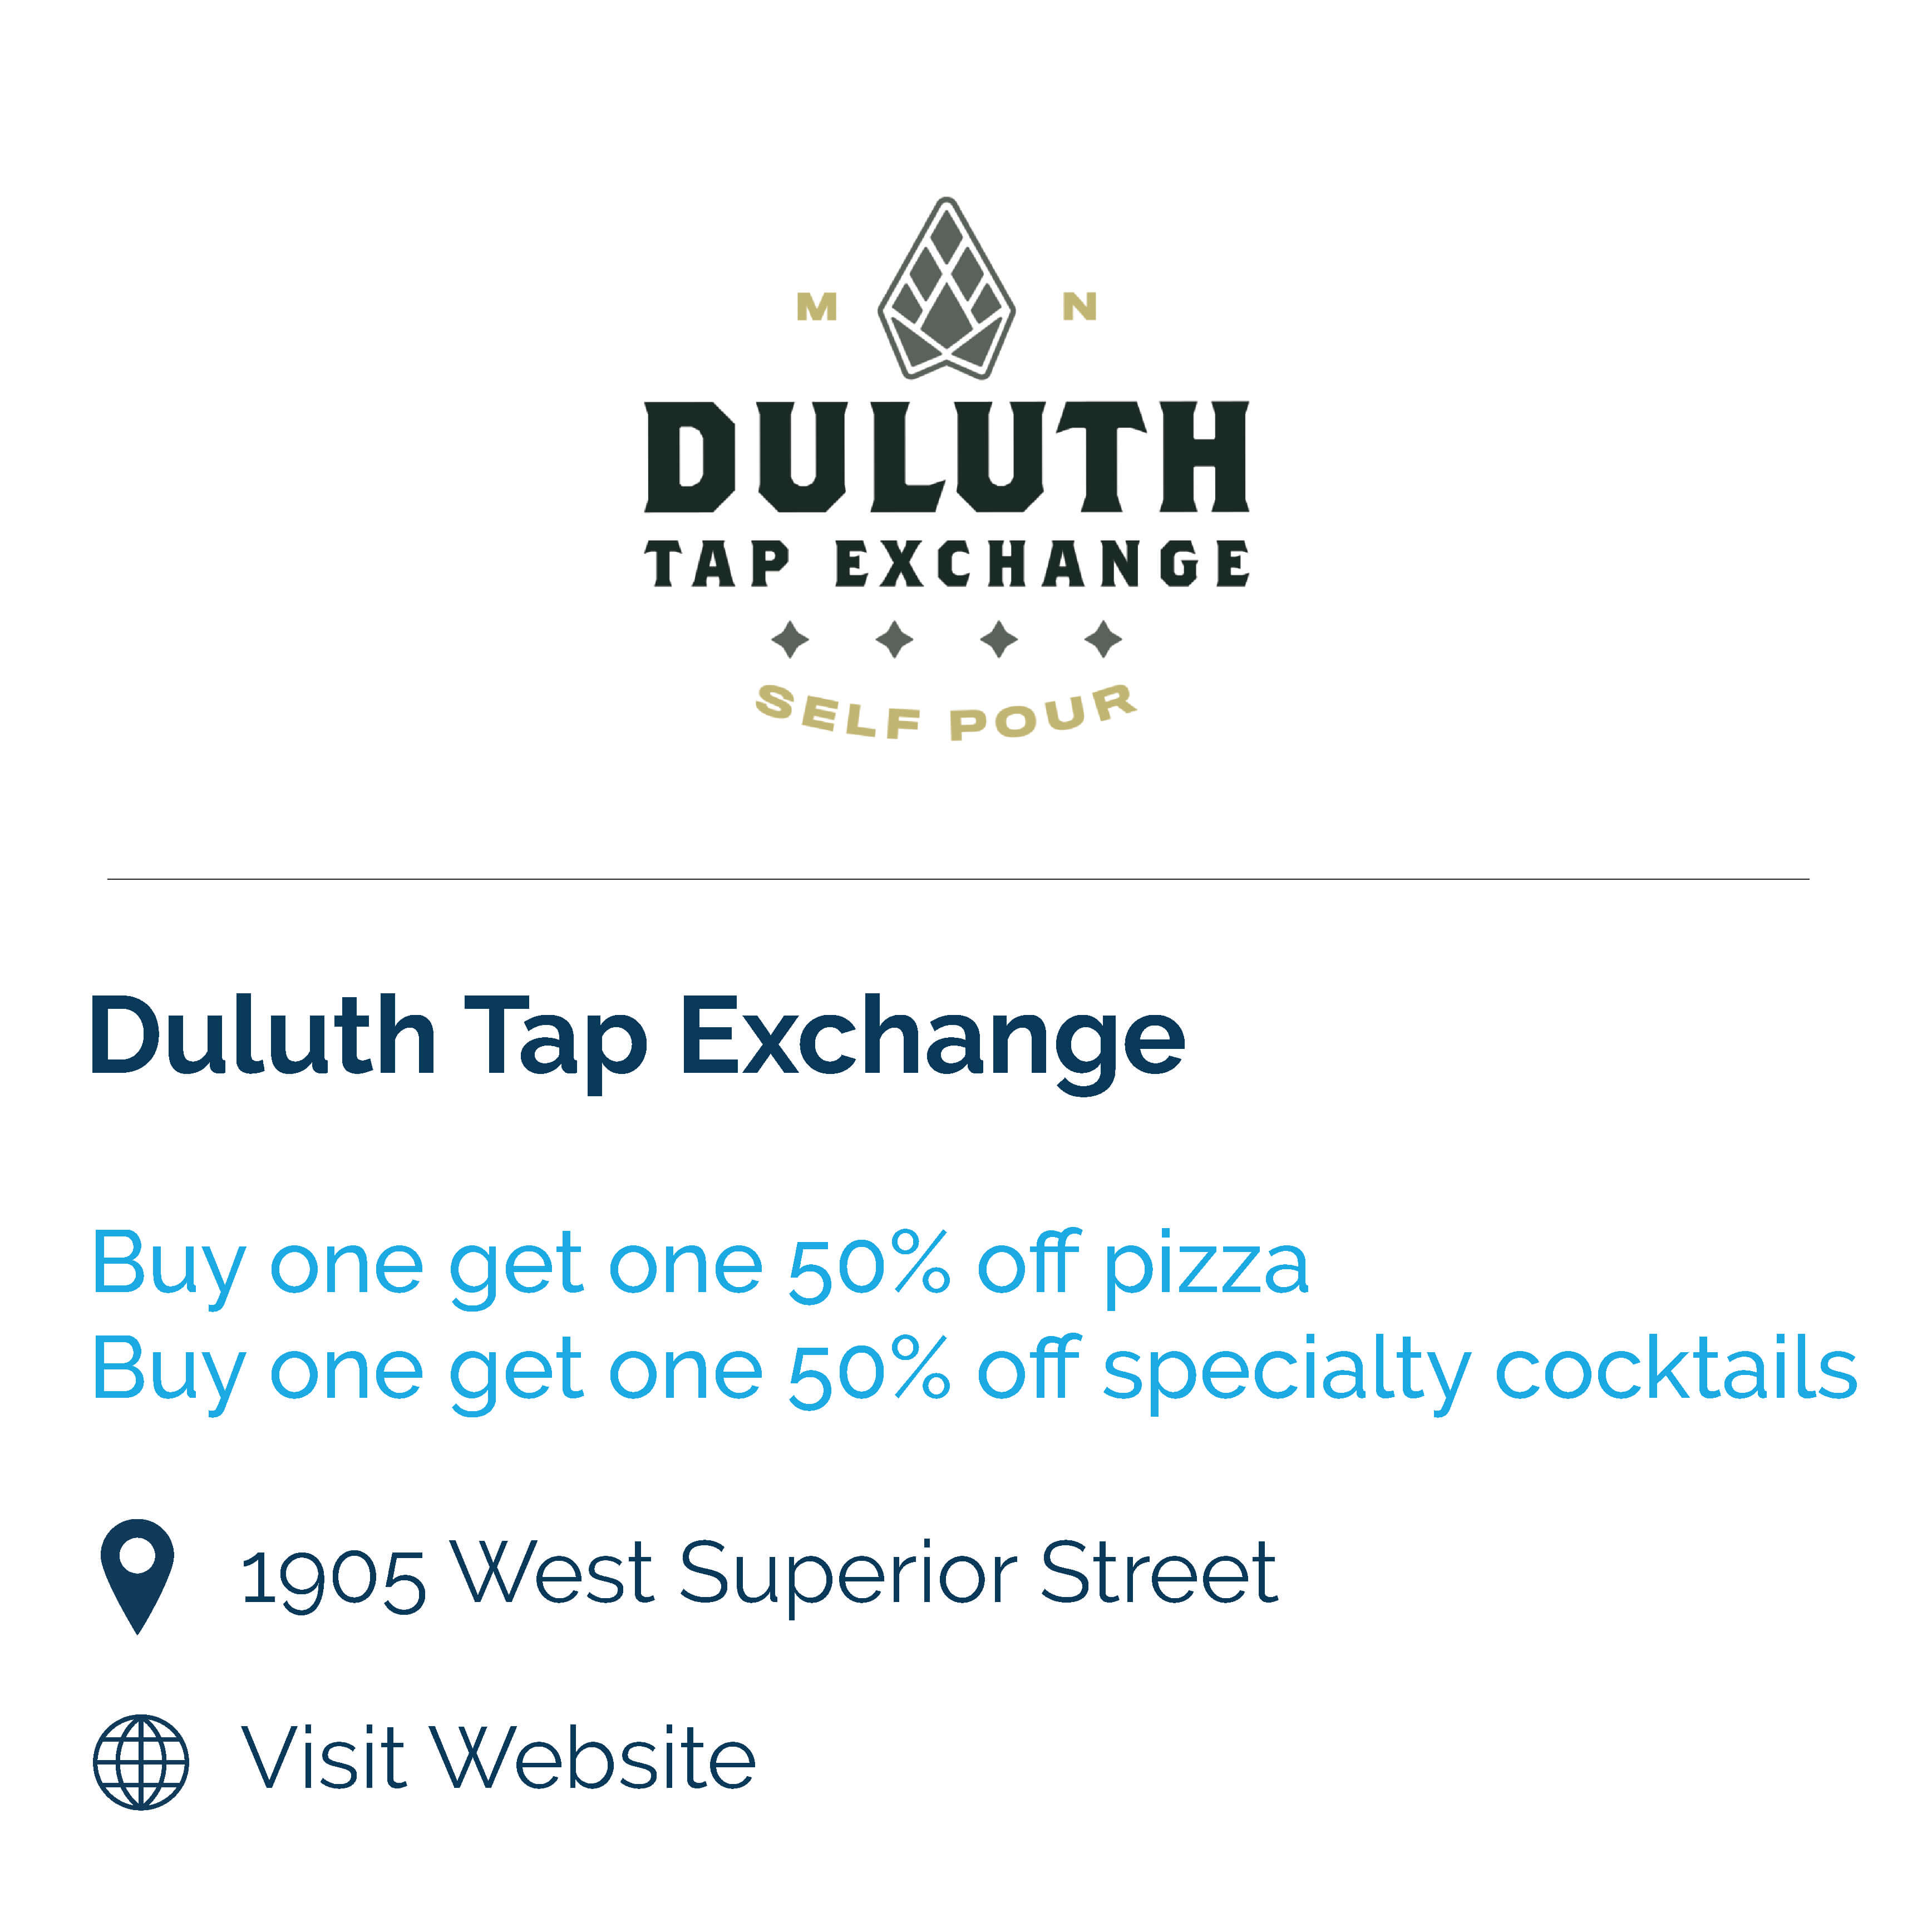 duluth tap exchange. buy one get one 50% off pizza. buy one get one 50% off specialty cocktails. 1905 west superior street